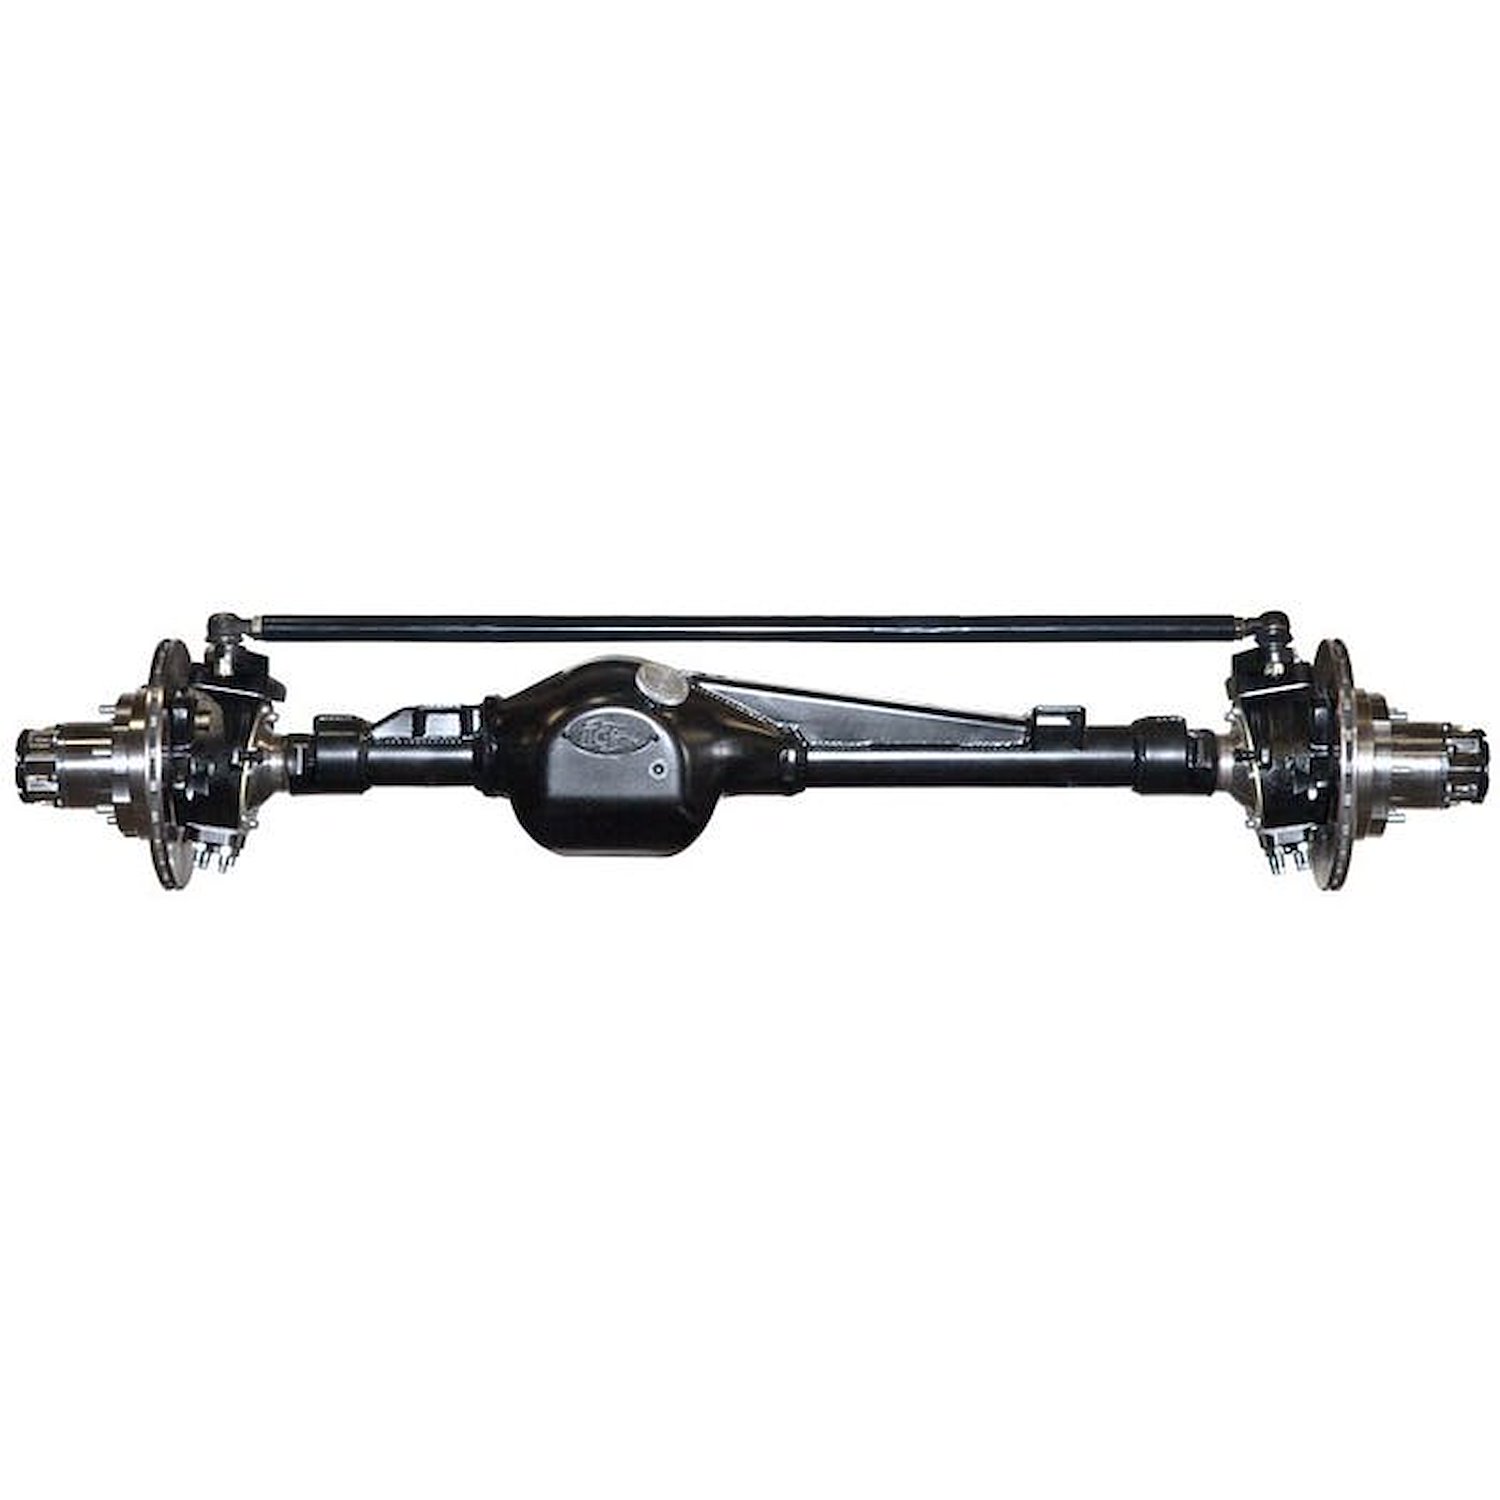 301641-1-KIT Rock Assault Fully-Built Front Axles, +5 Width, RHD, 4-Cylinder, 4.88, Grizzly, Locking Hubs, Toyota